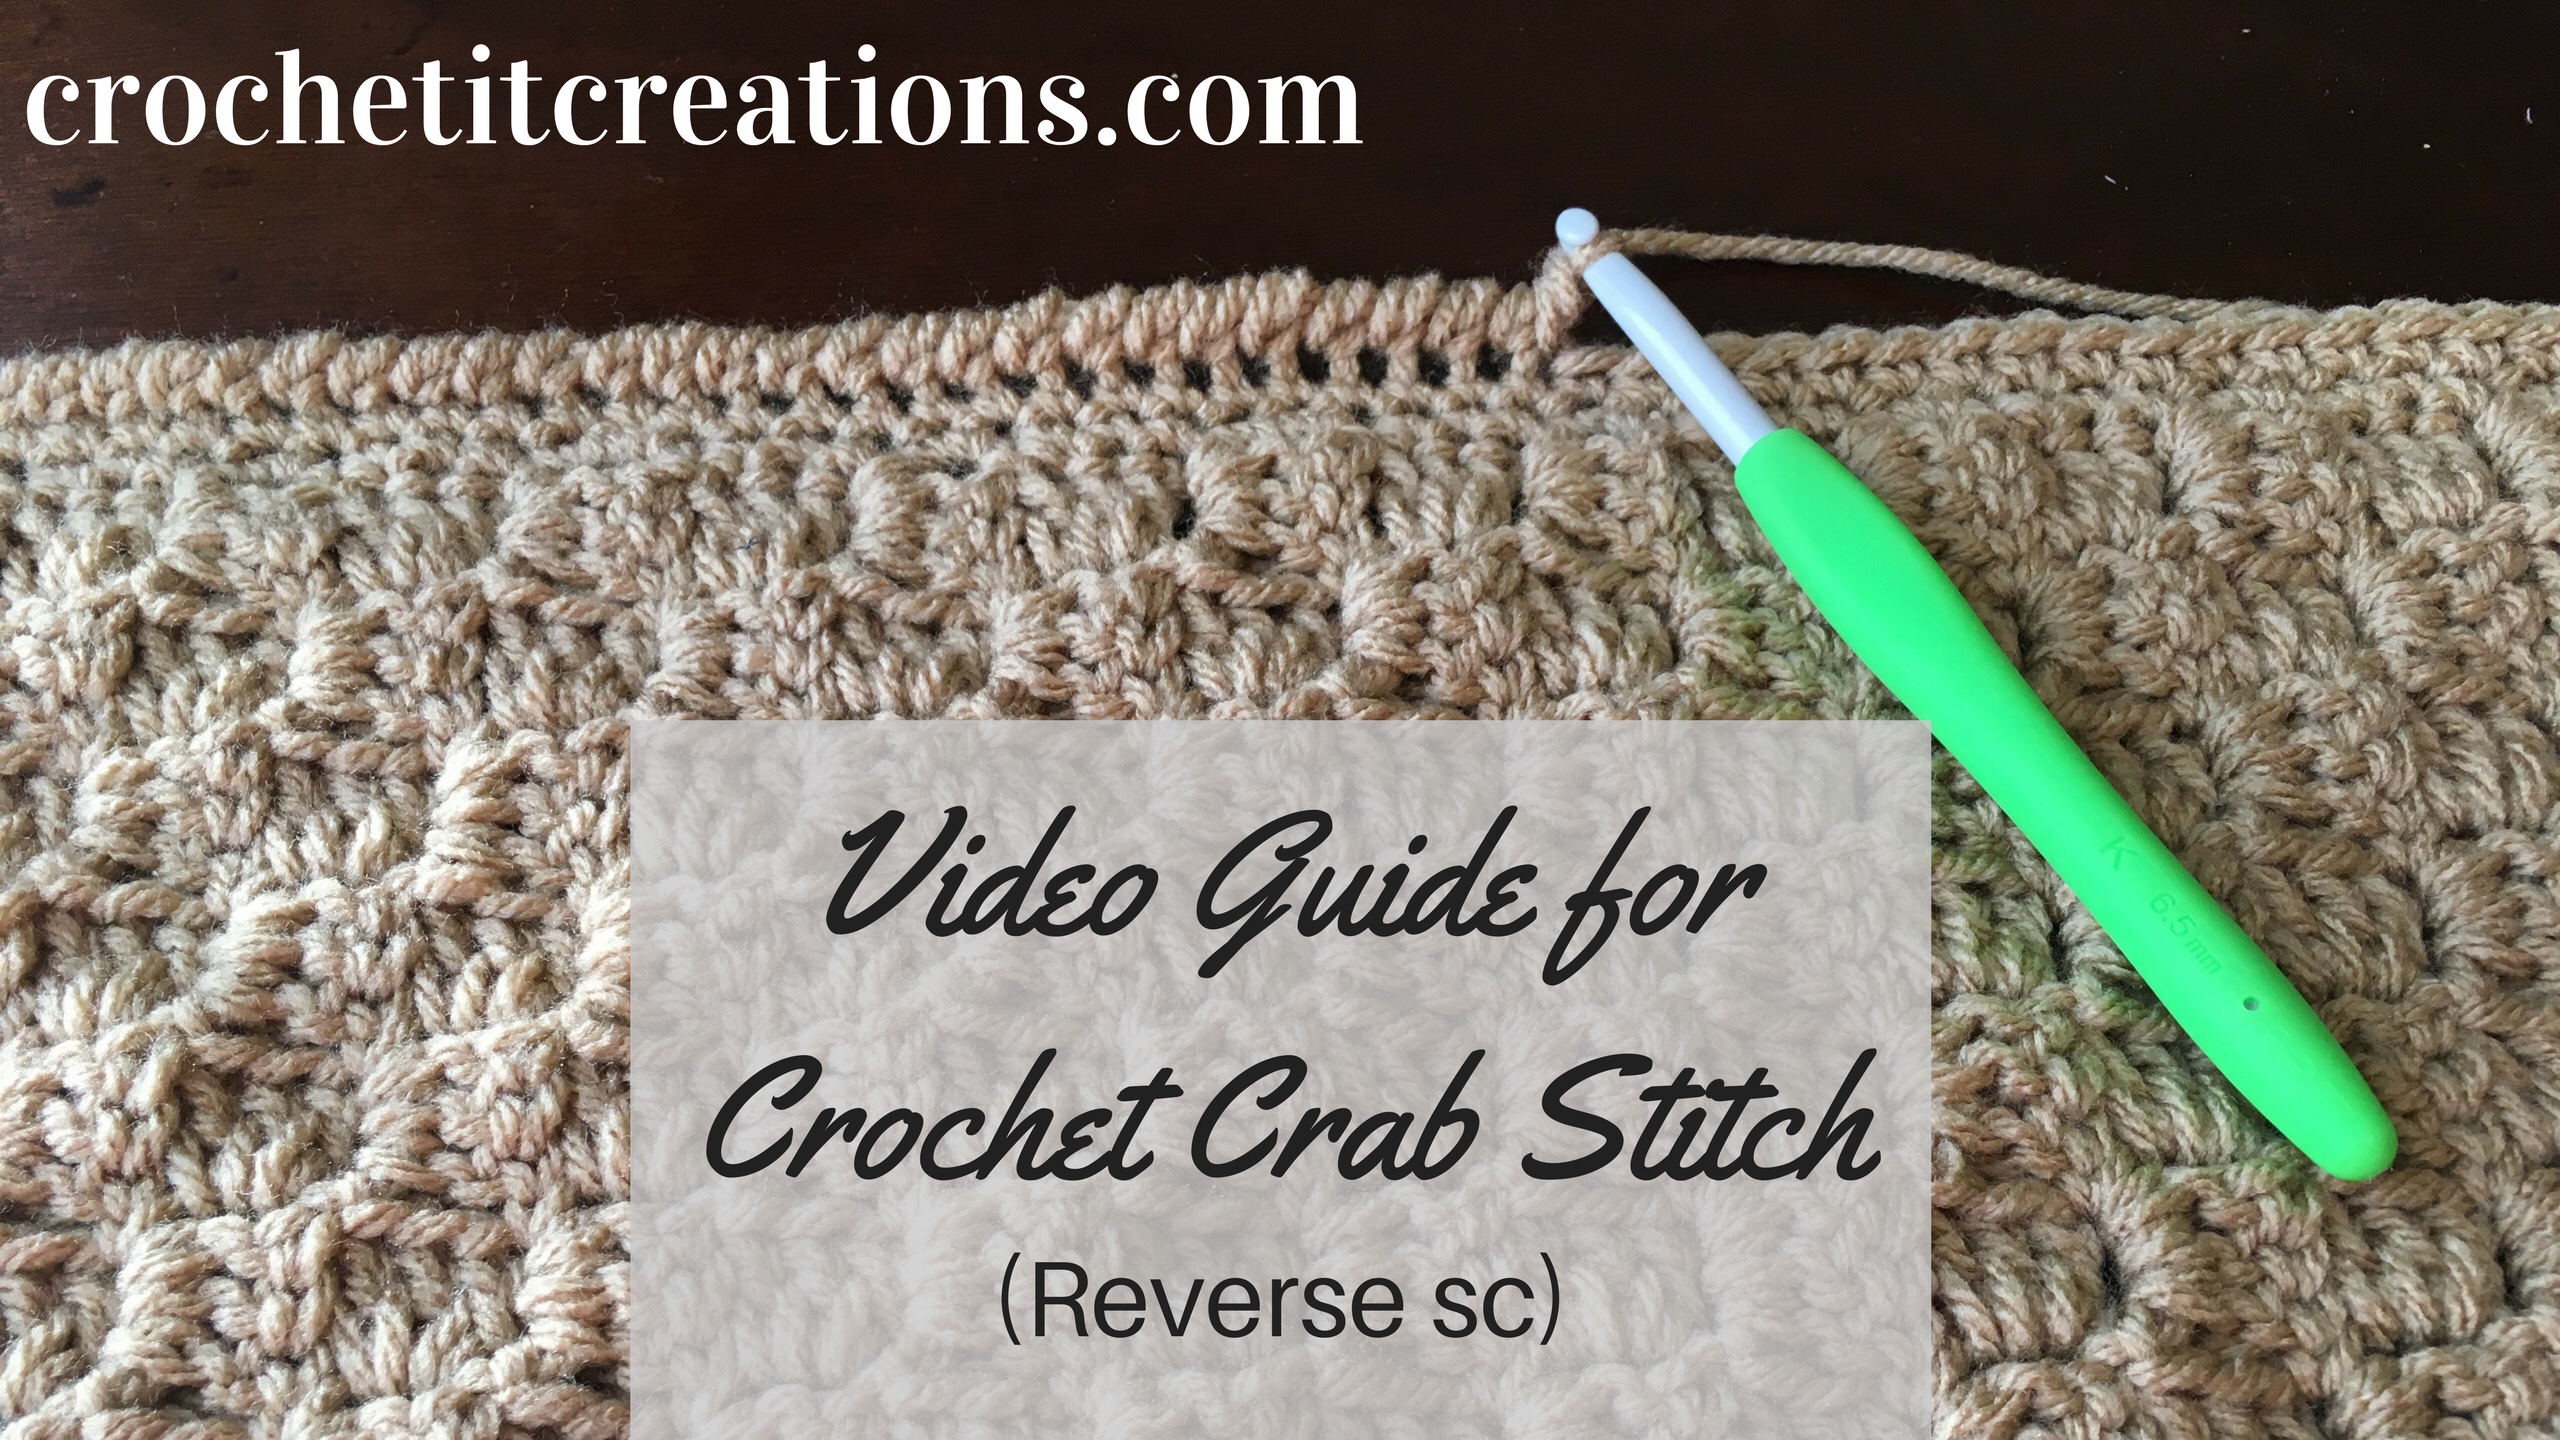 Video Guide for Crochet Crab Stitch